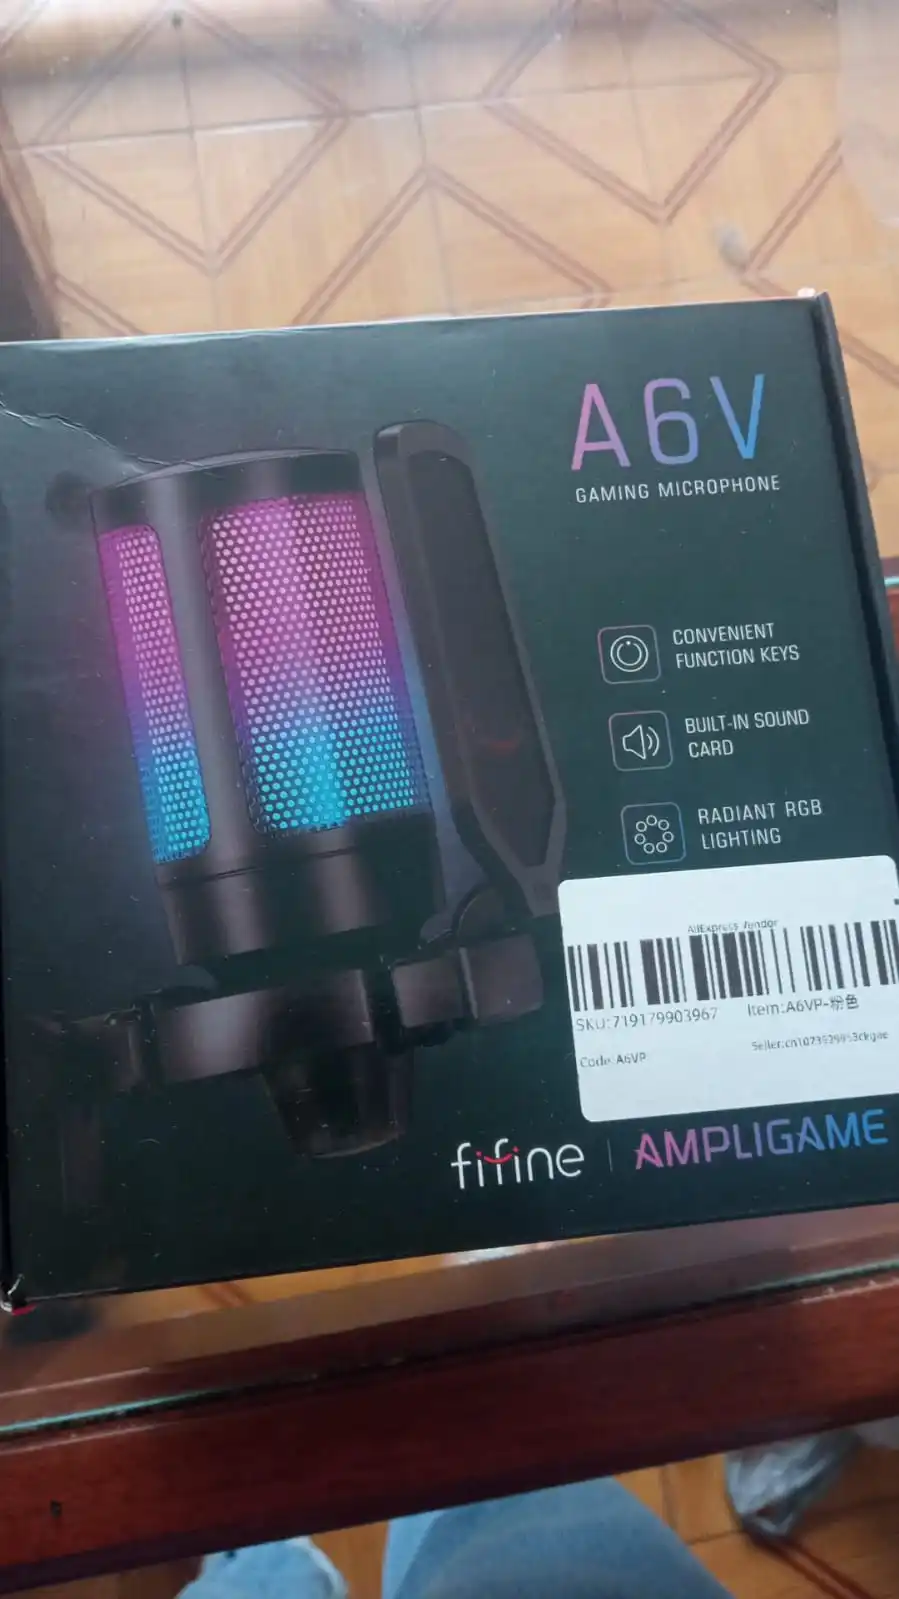 Microfone Gamer Fifine Ampligame A6V photo review